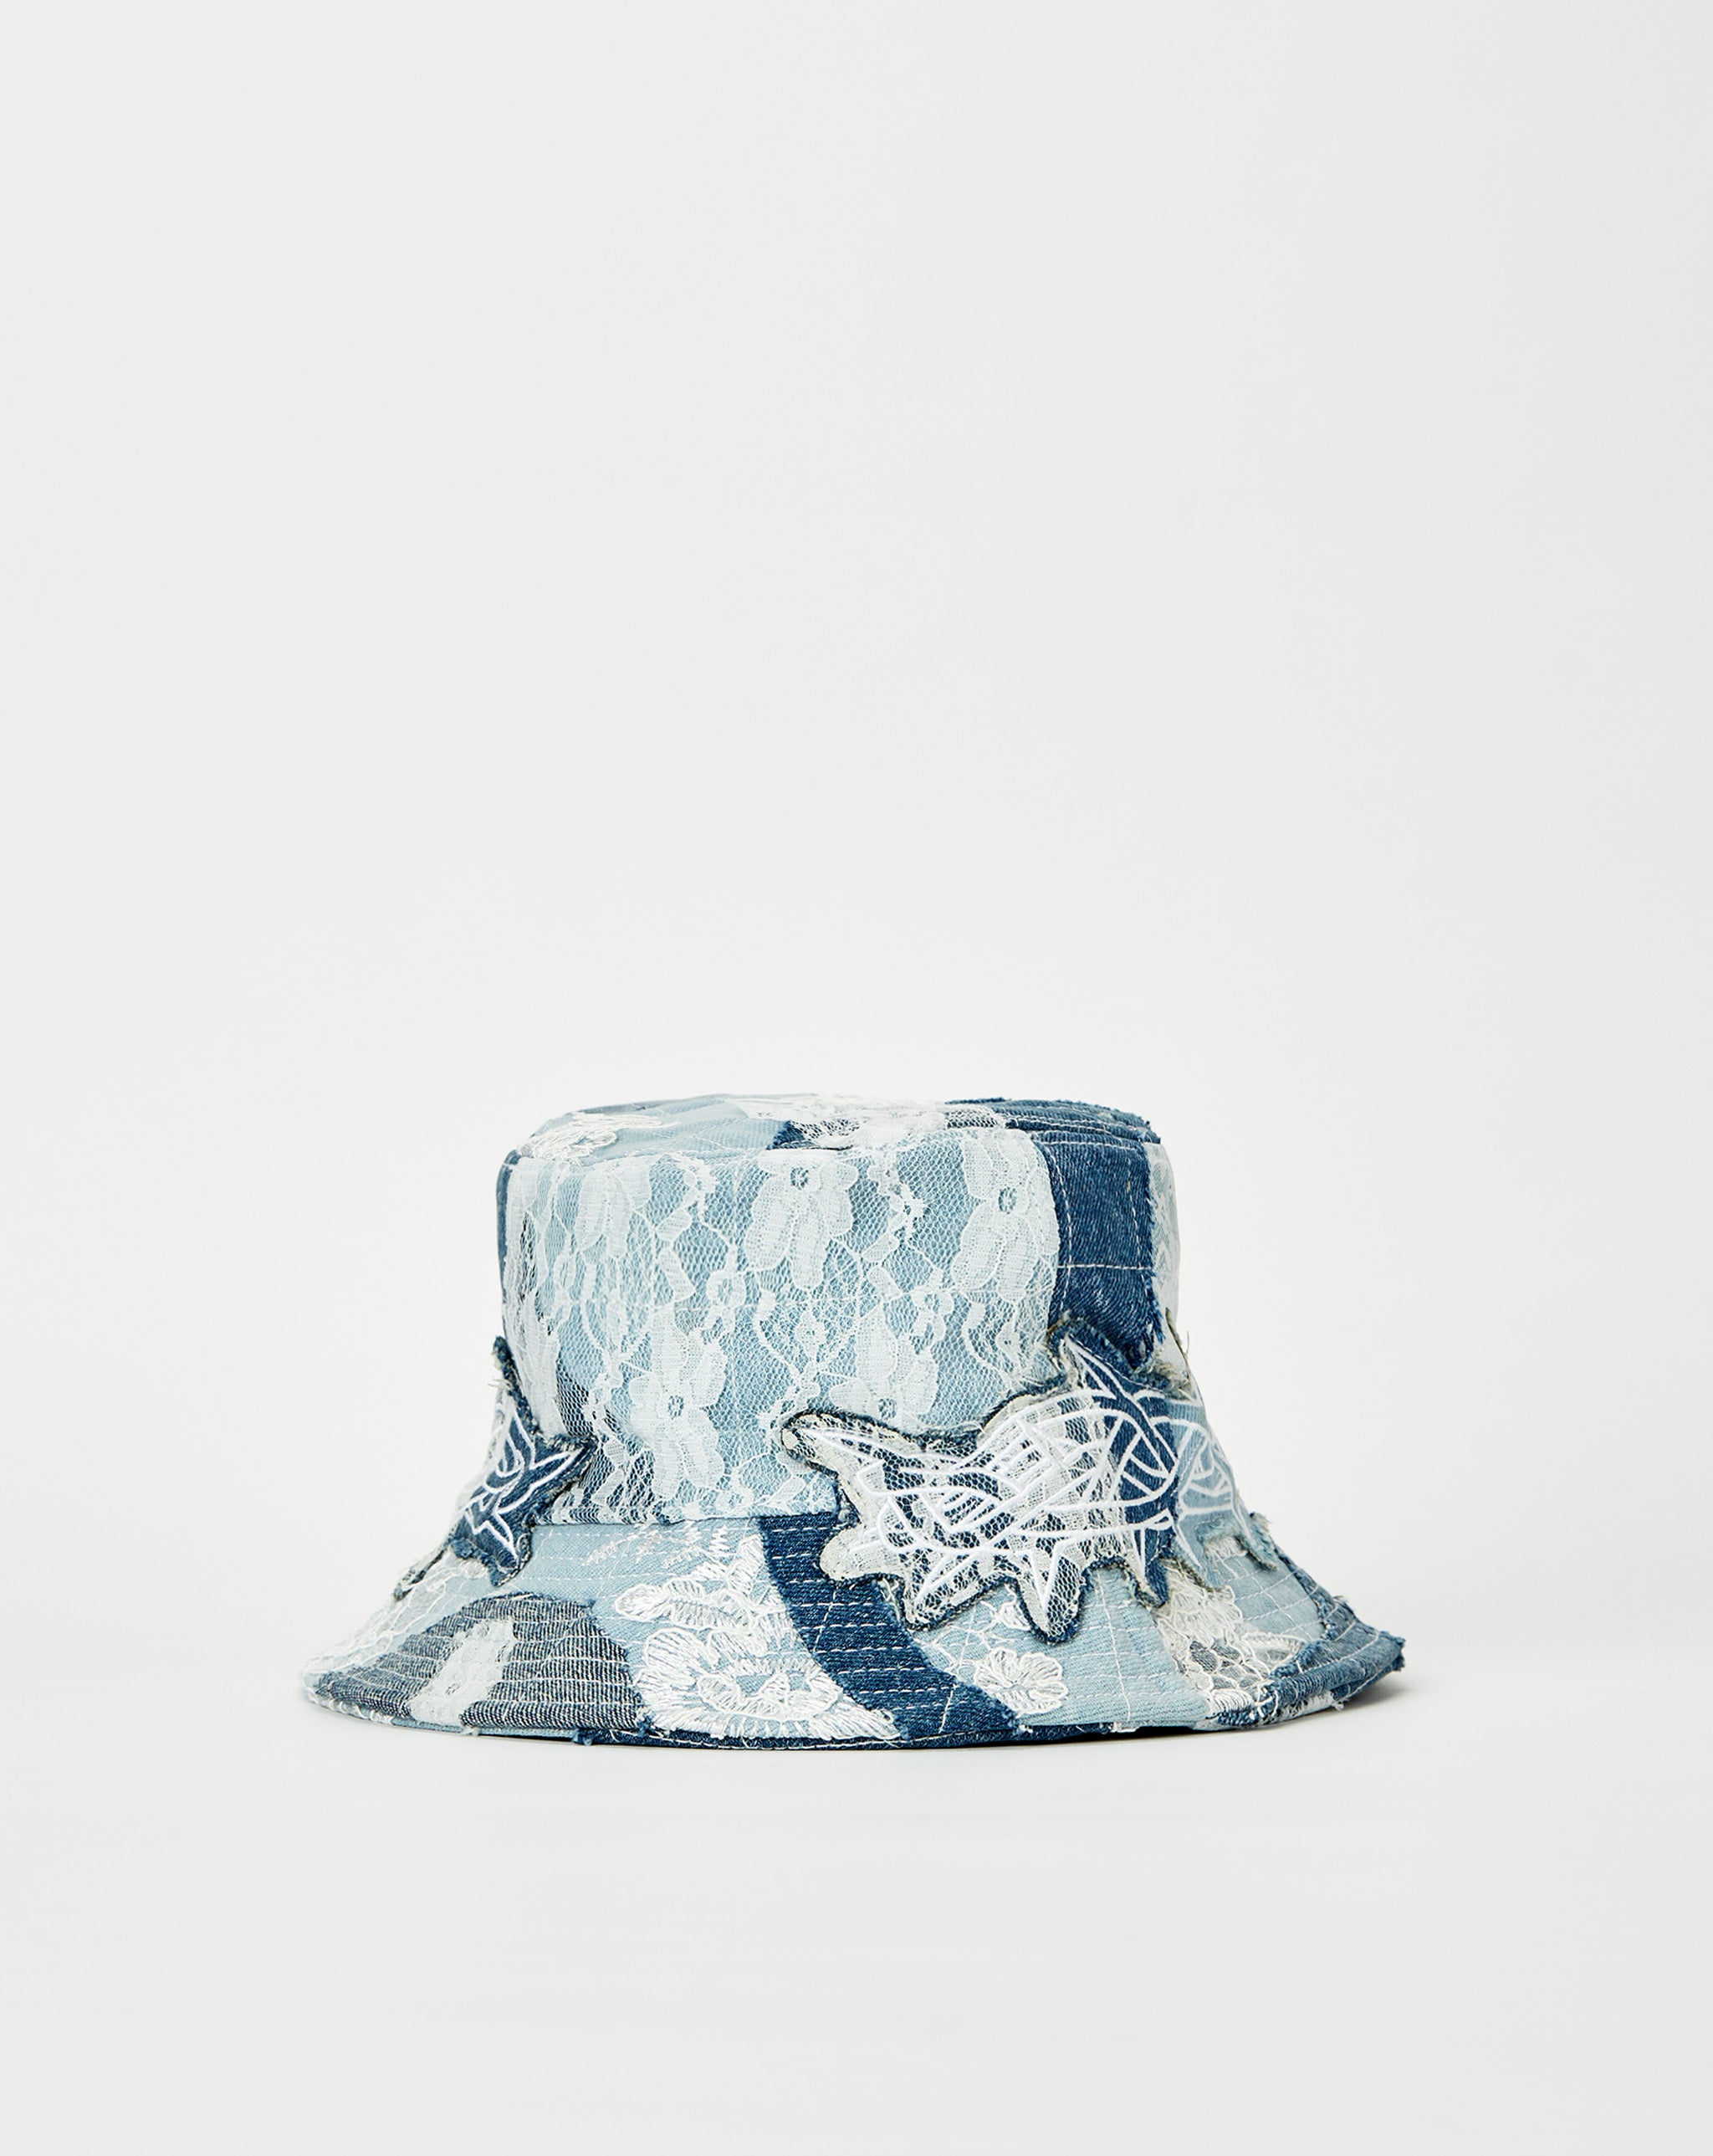 Who Decides War Thorn Wrapped Grid Bucket Hat  - Cheap 127-0 Jordan outlet